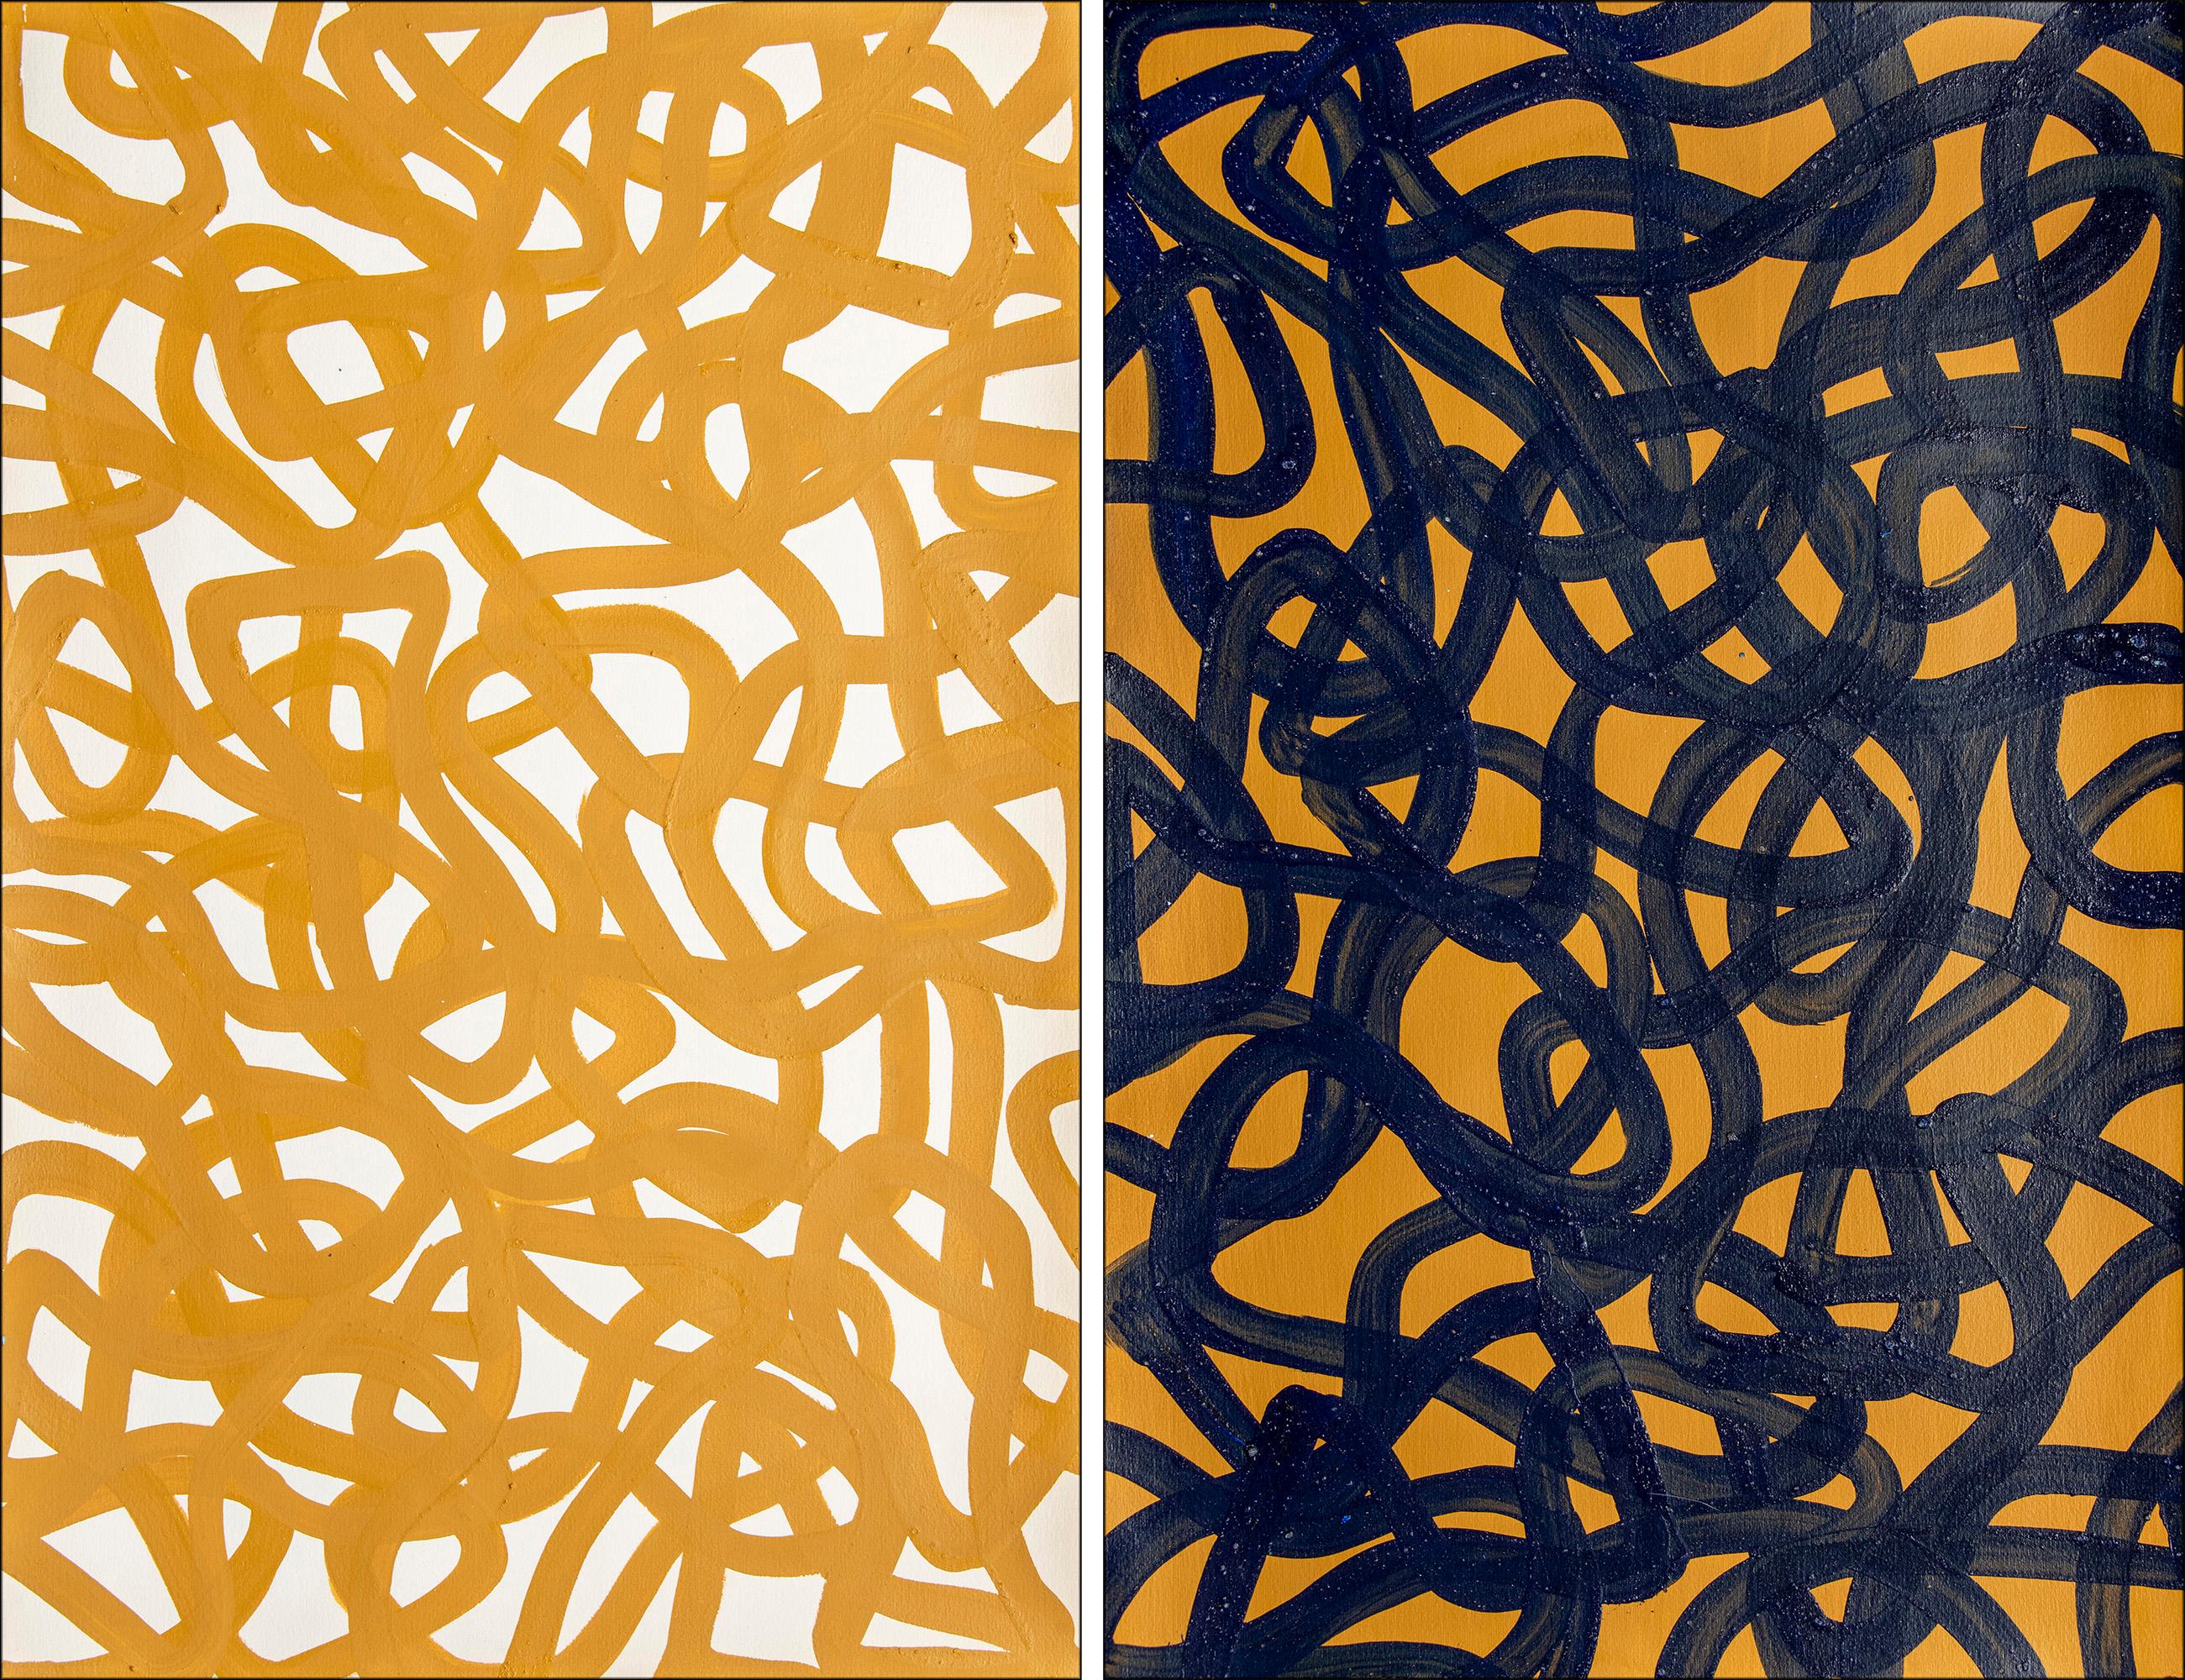 Enric Servera Abstract Painting - Ochre and Black Diptych, Overlapping White Abstract Fish Gestures, Mediterranean